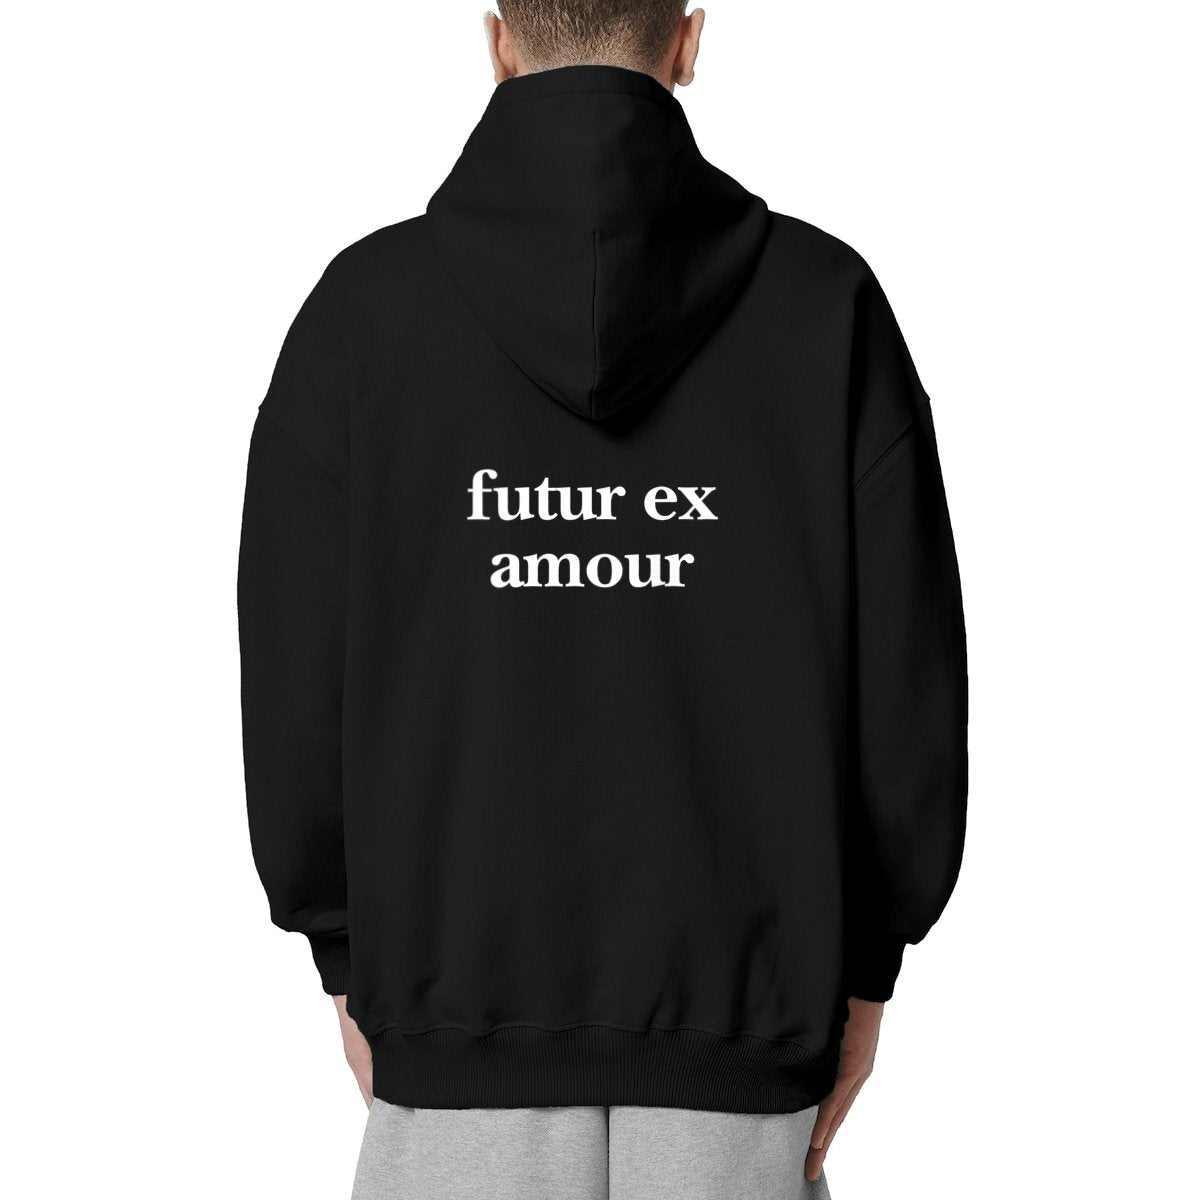 futur ex amour hoodie oversized. garçon garçon essentiel oversized hoodie. Sleek in black and whispering Parisian chic, this hoodie is the sartorial whisper of 'garçon garçon' — a statement of understated elegance. Perfect for those who carry a piece of Paris in their hearts and a touch of audacity on their sleeves.